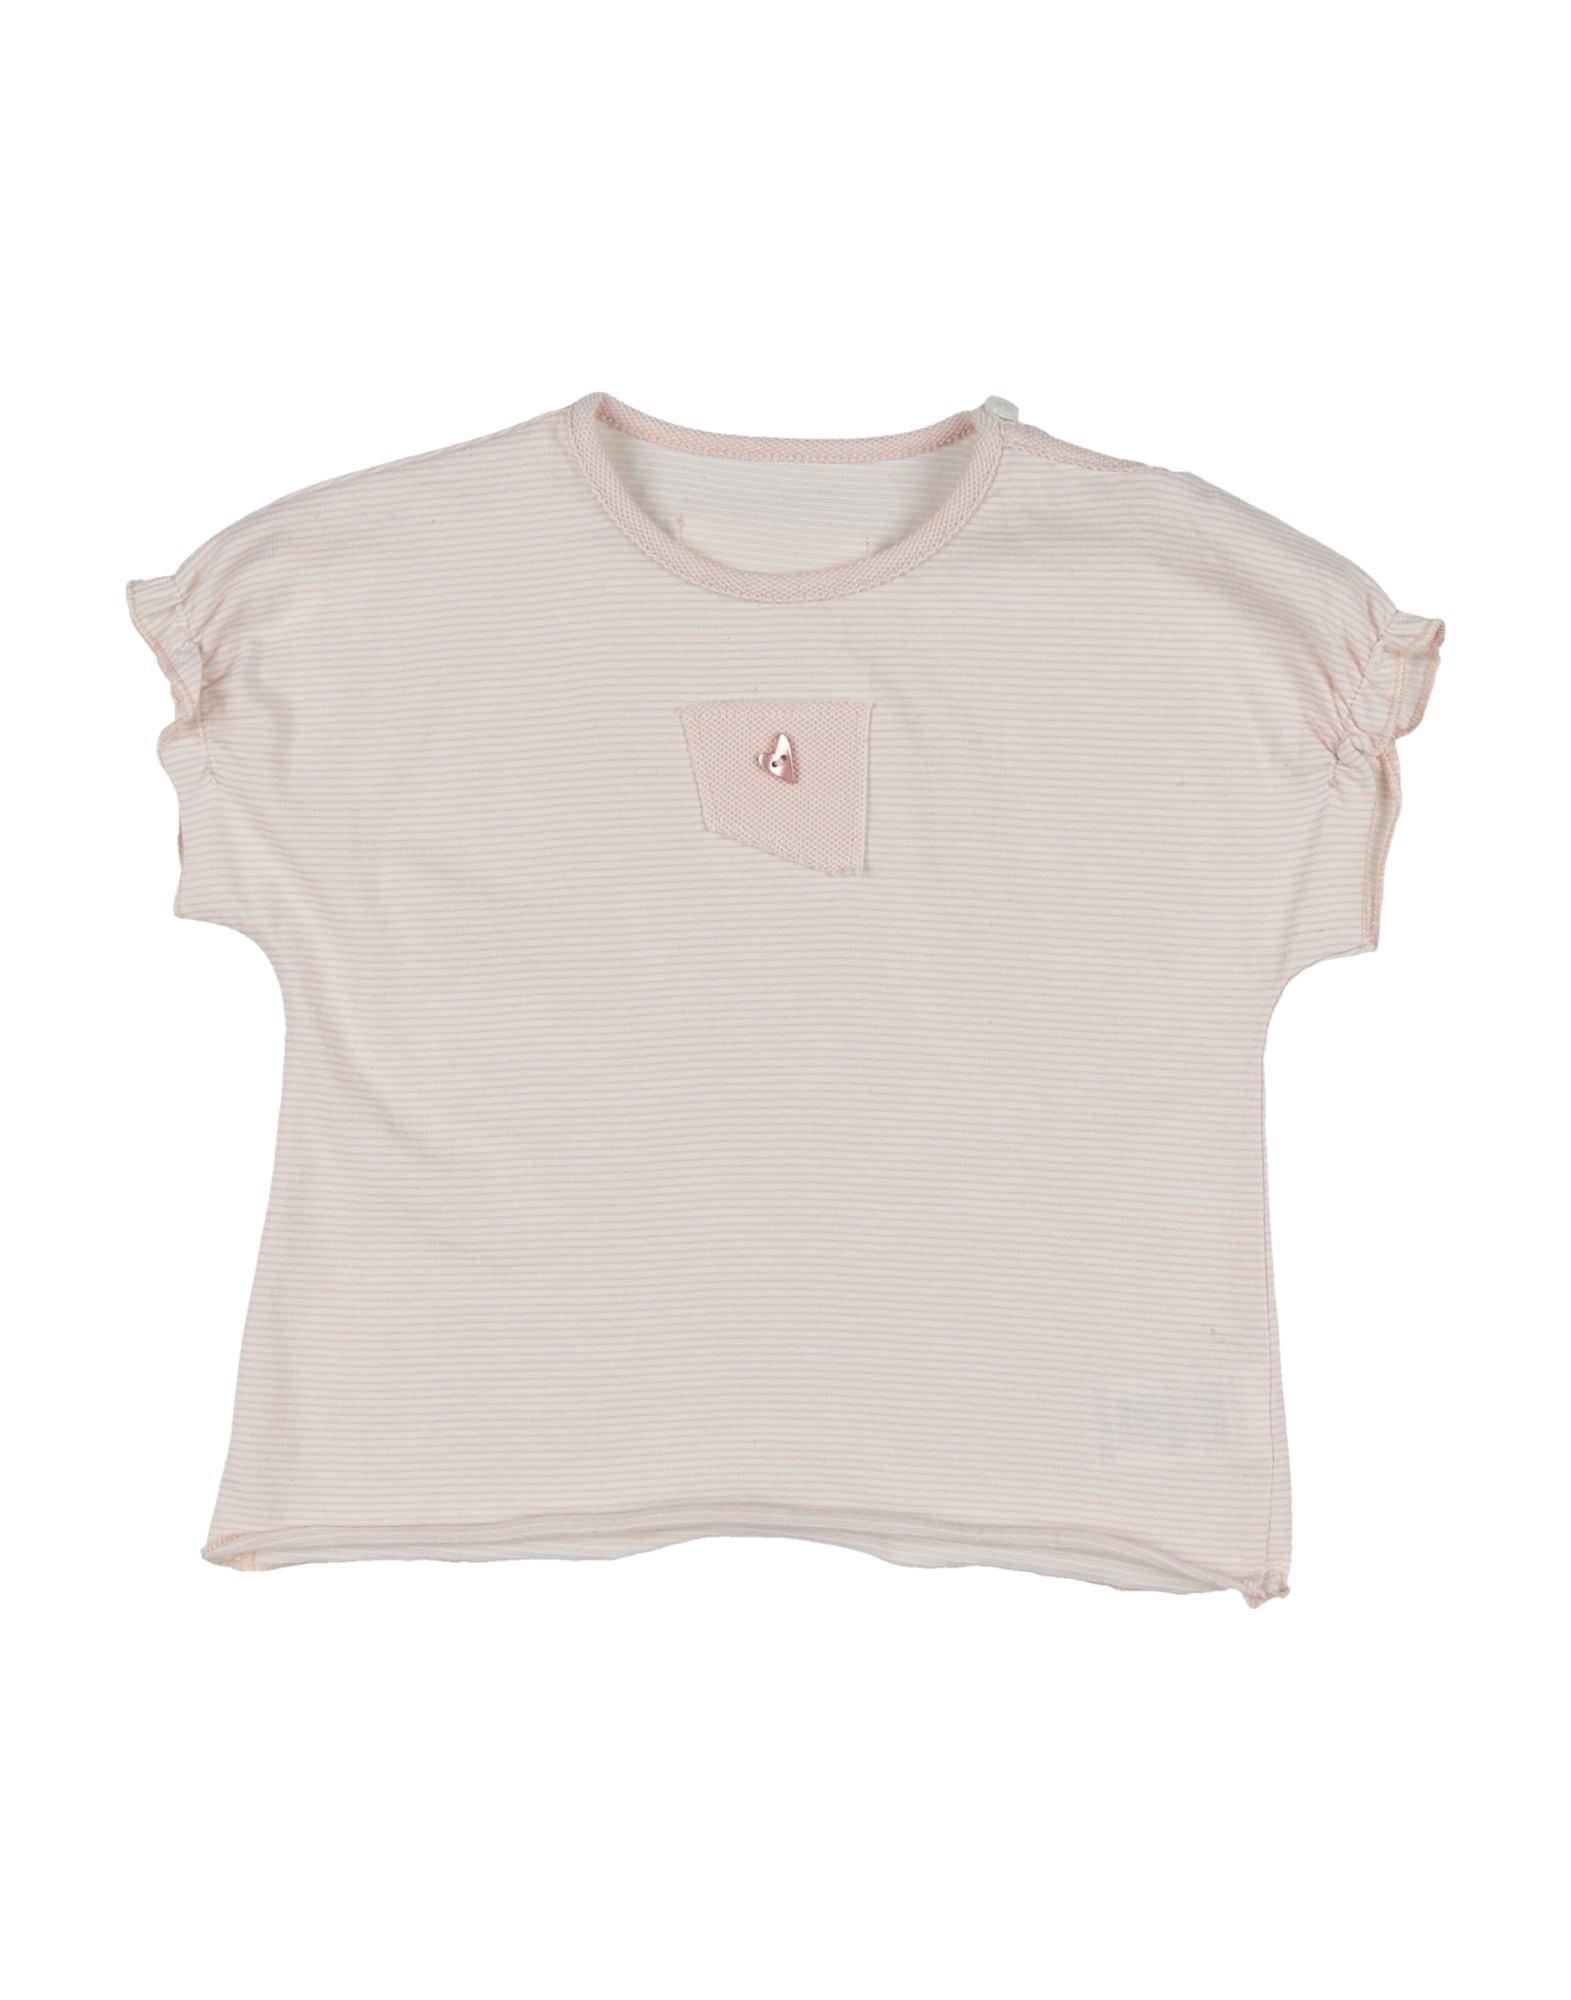 Frugoo Kids' T-shirts In Pink